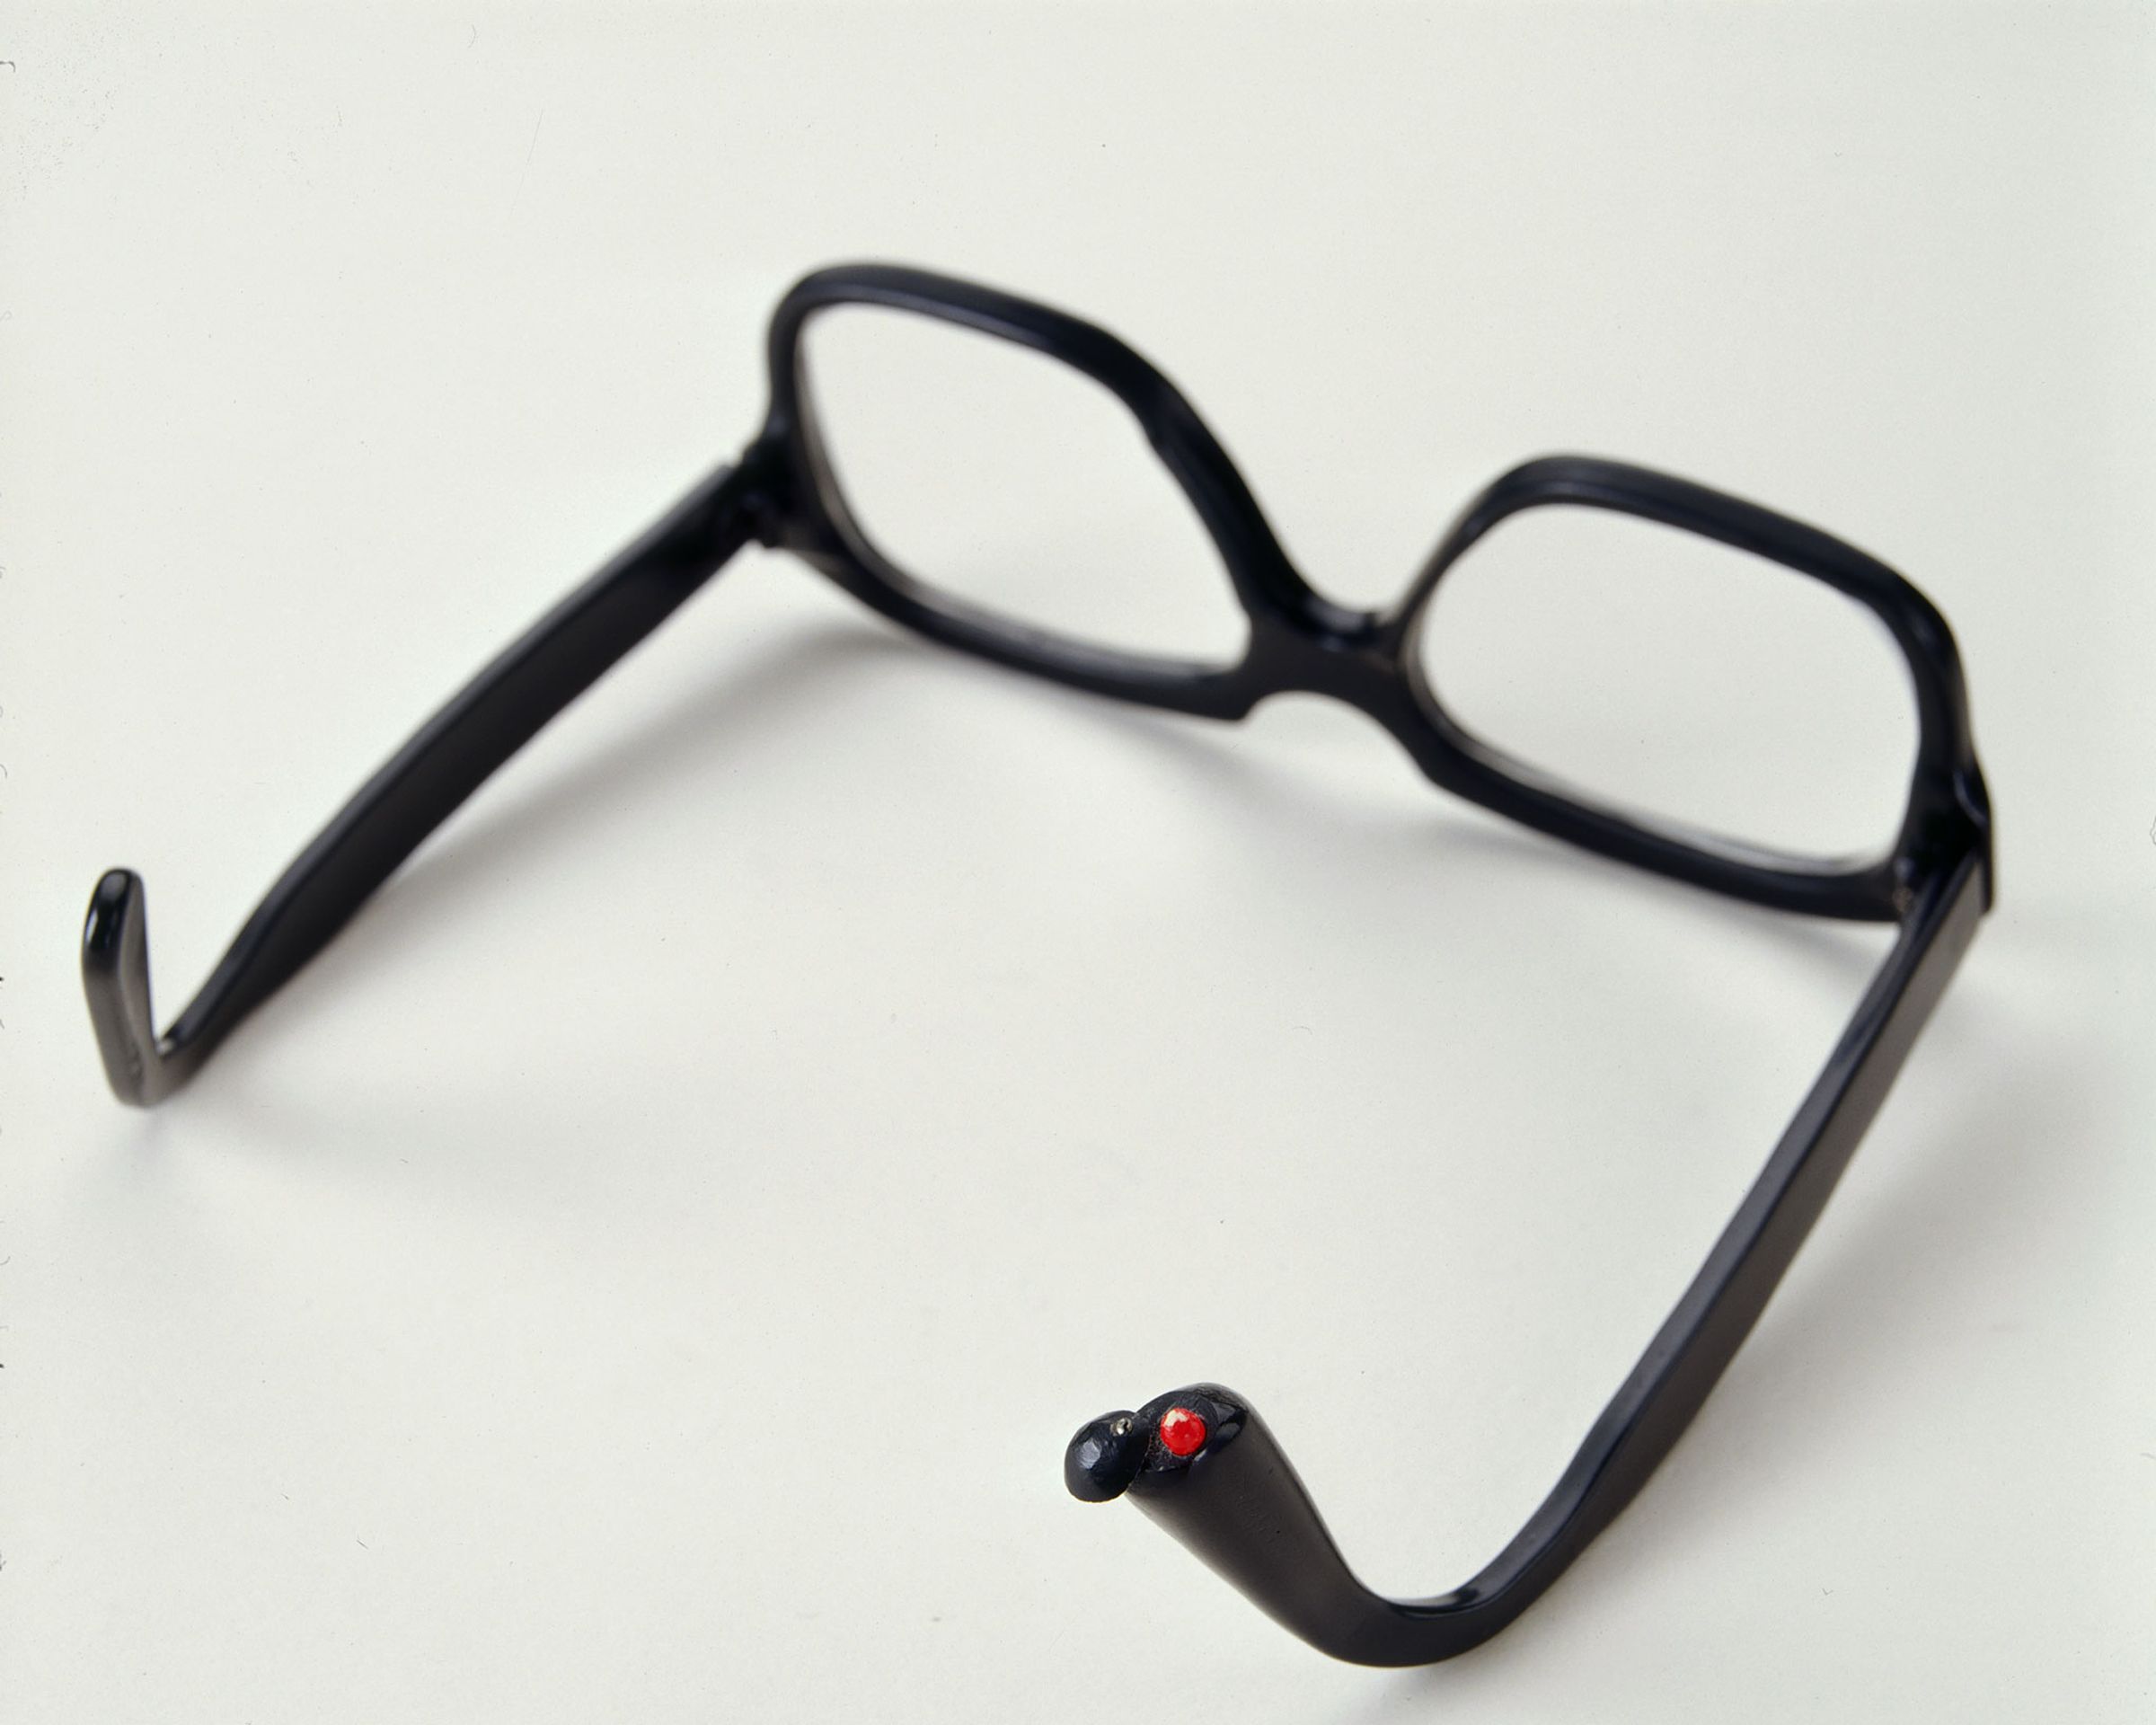 Upside-down pair of glasses where you can see a pill hidden in the arm.